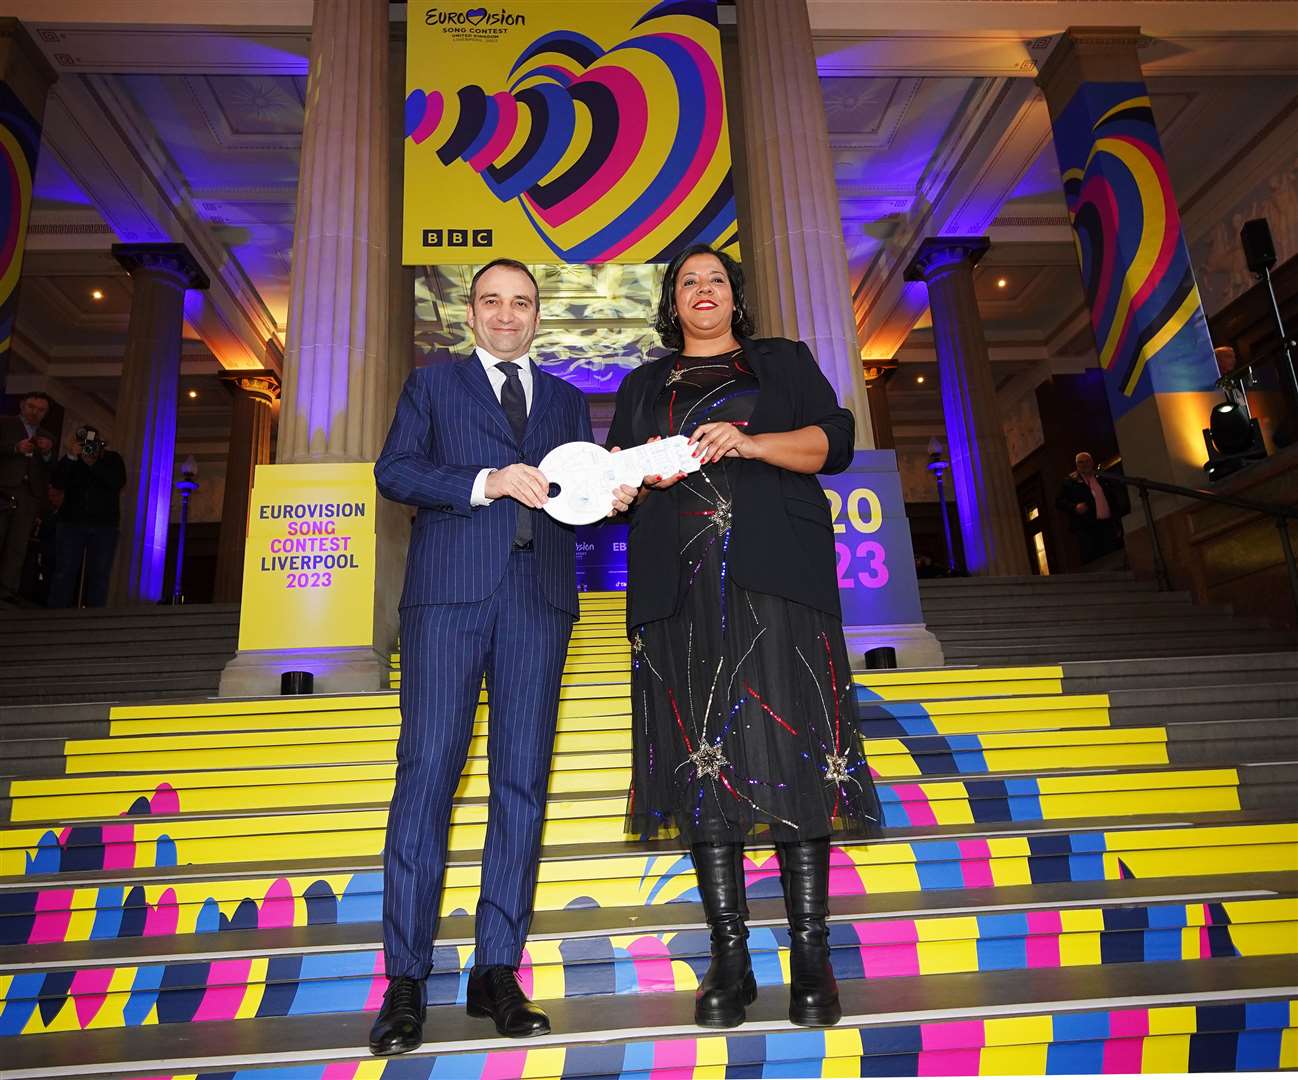 Mayor of Turin Stefano Lo Russo and Mayor of Liverpool Joanne Anderson at St George’s Hall in Liverpool, as the Eurovision Song Contest is officially passed to the city of Liverpool (Peter Byrne/PA)